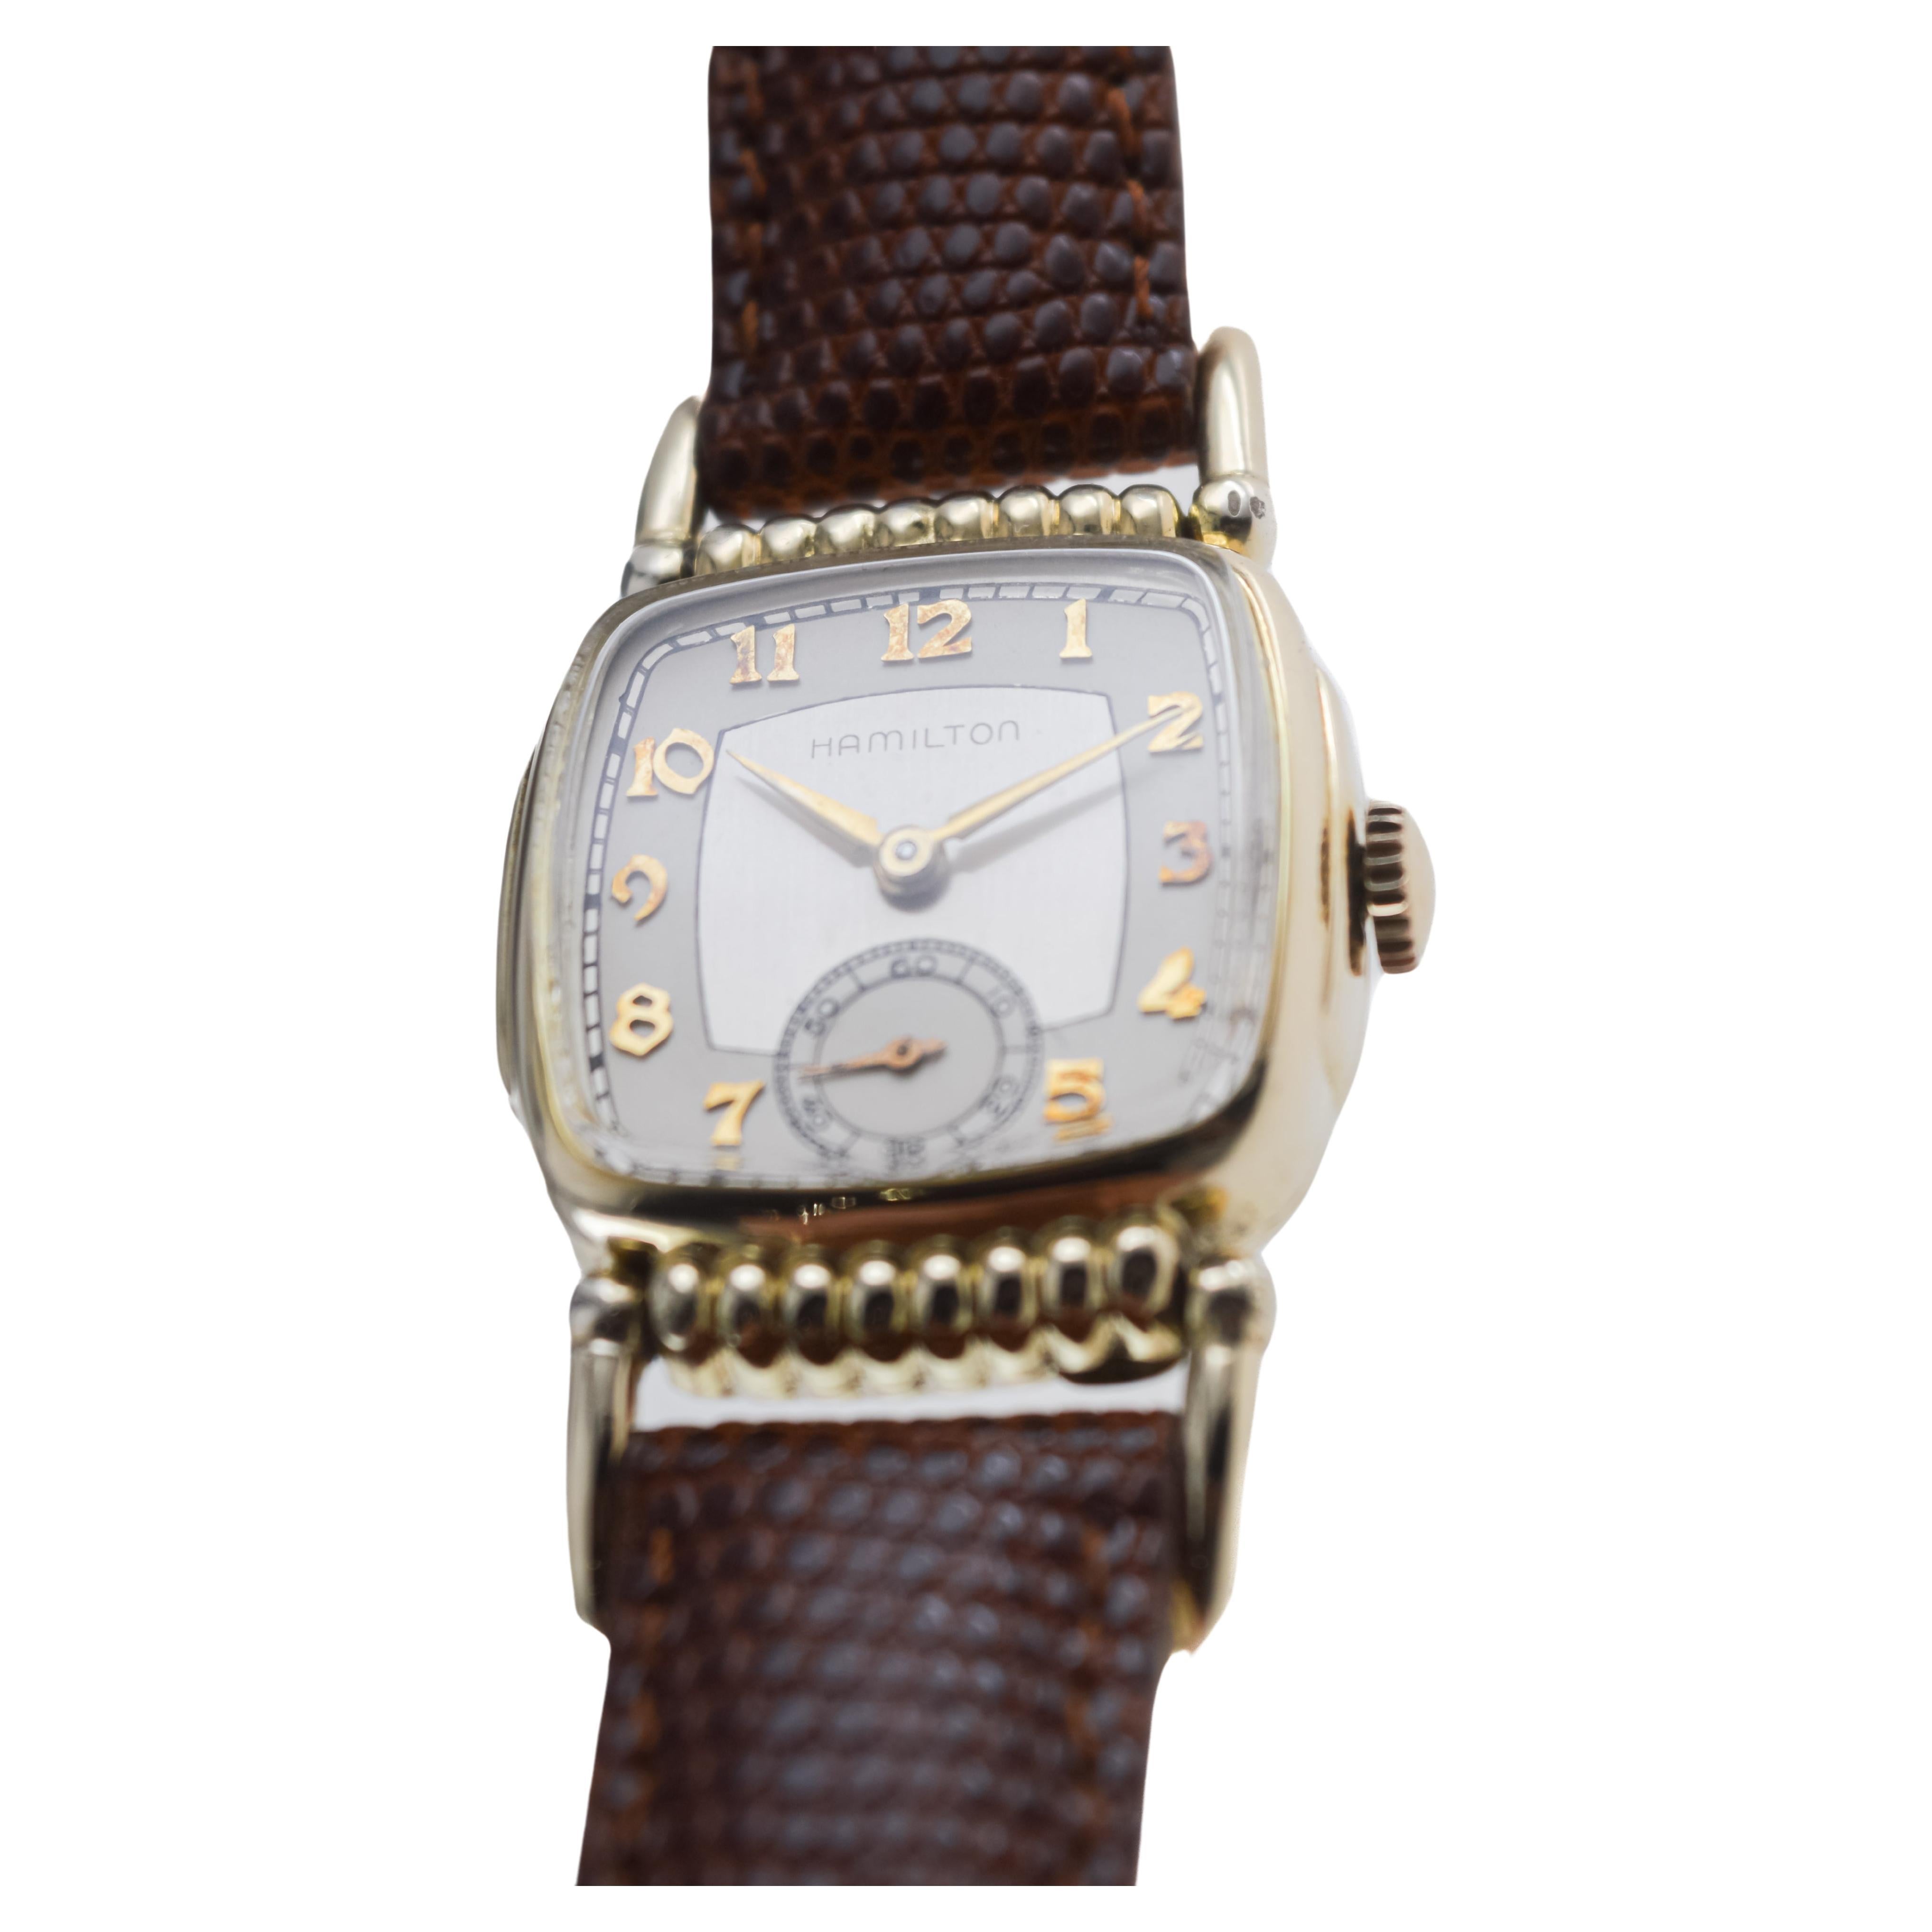 Hamilton Gold-Filled Art Deco Watch with Articulating Lugs 1940's In Excellent Condition For Sale In Long Beach, CA